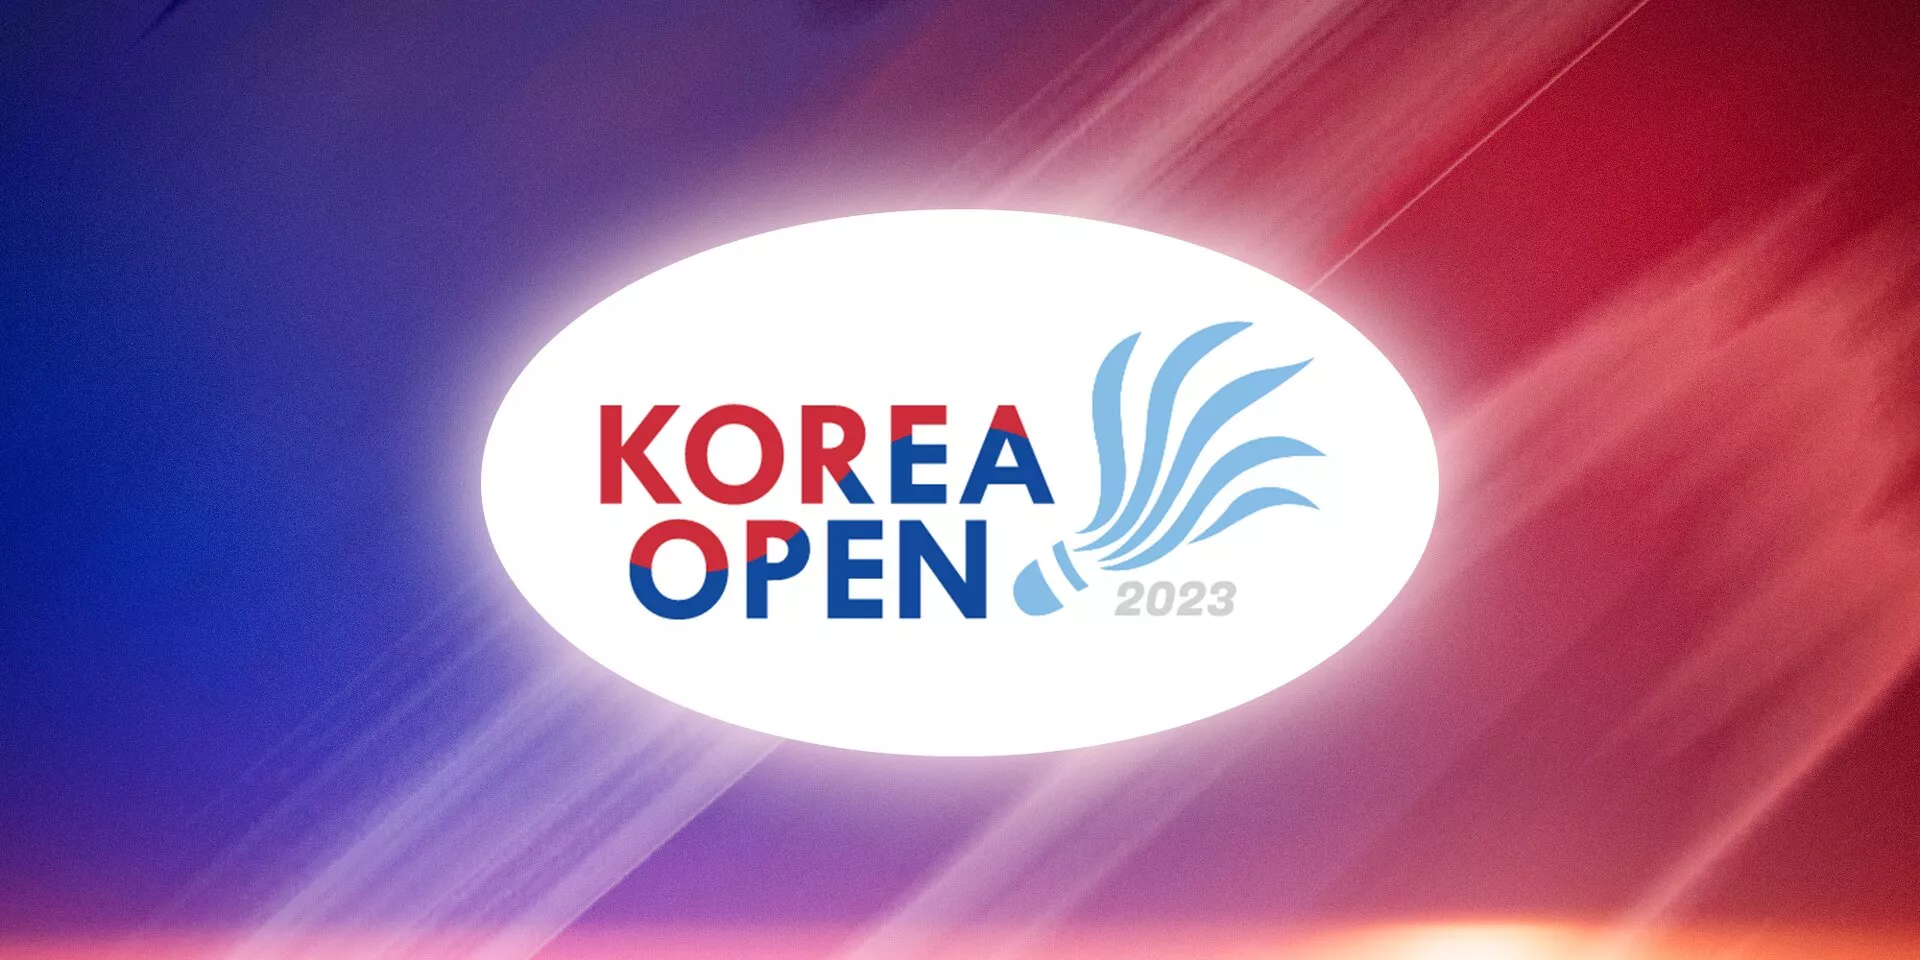 Korea Open 2023 Updated Schedule, fixtures, results and live streaming details